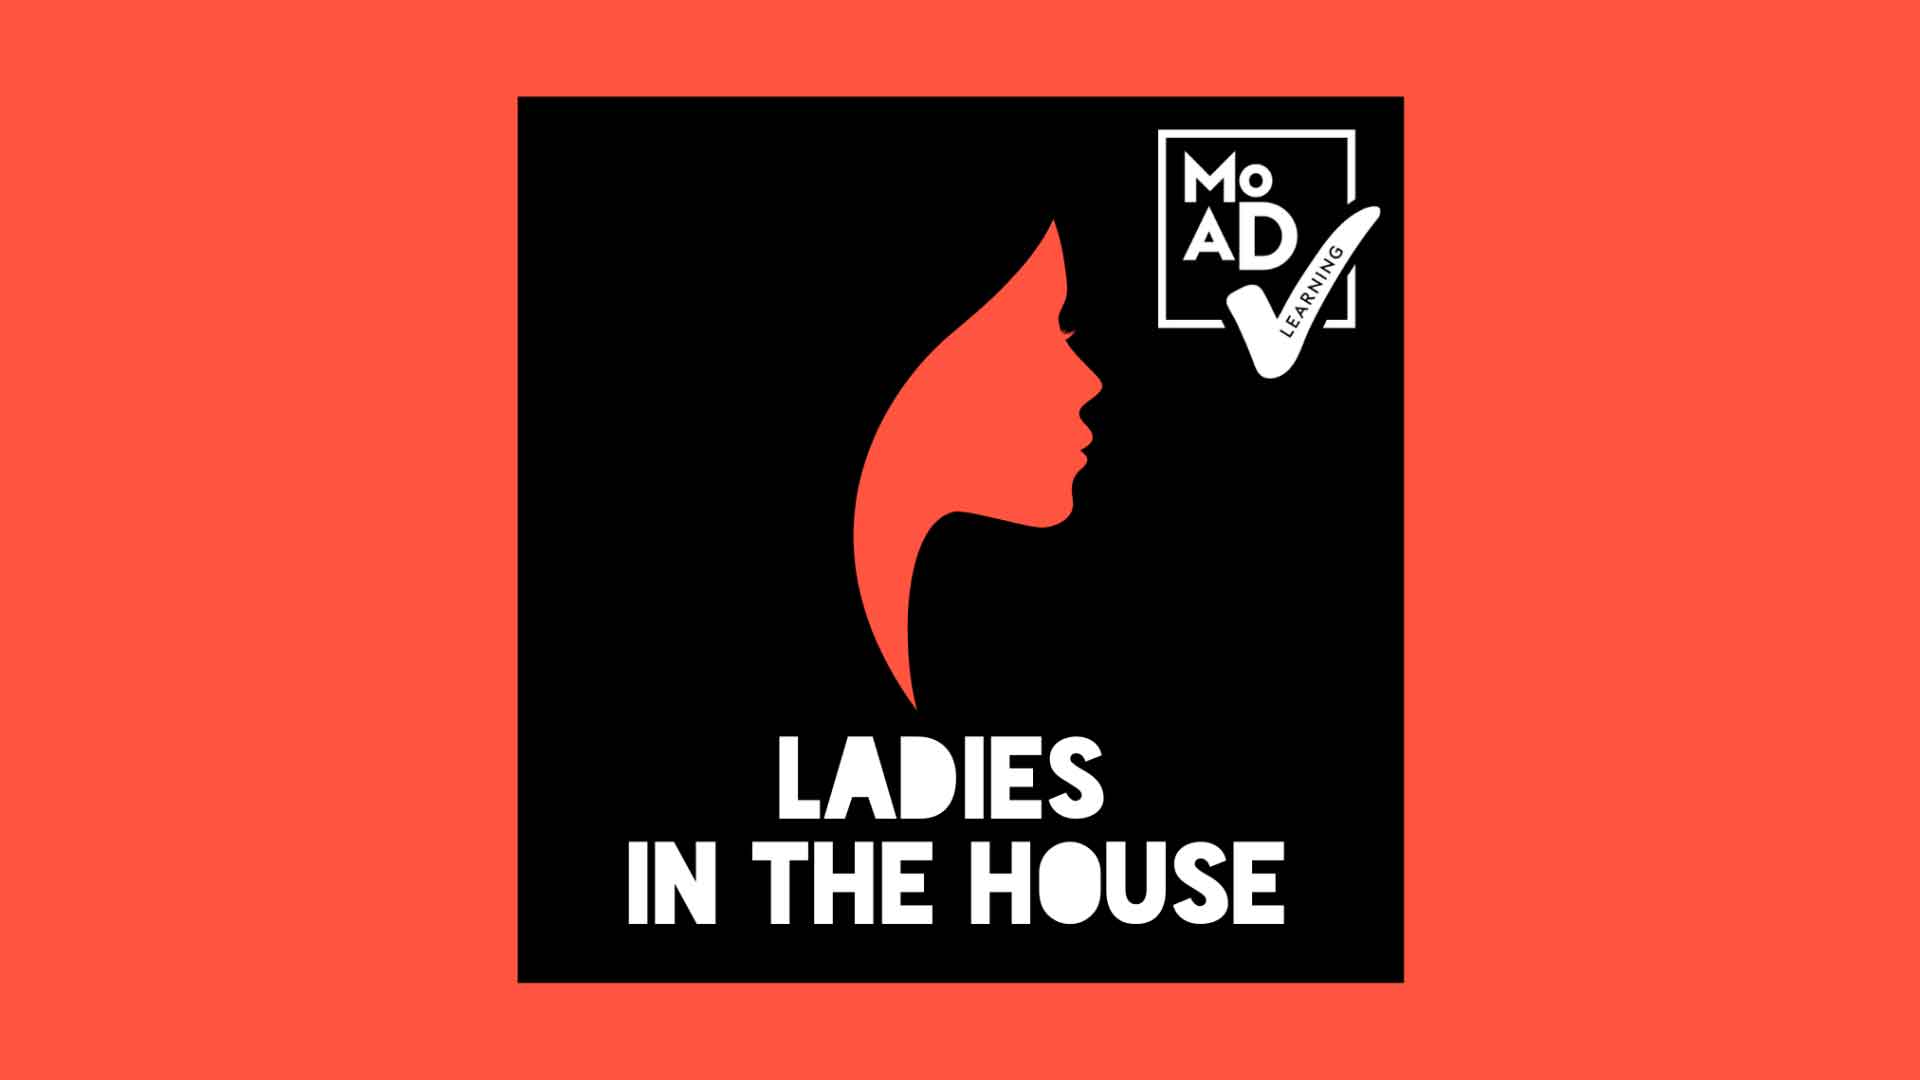 Logo for the Podcast Ladies in the House showing a graphic of a woman's face in red, against a black background. Also includes a logo which says 'MOAD learning'